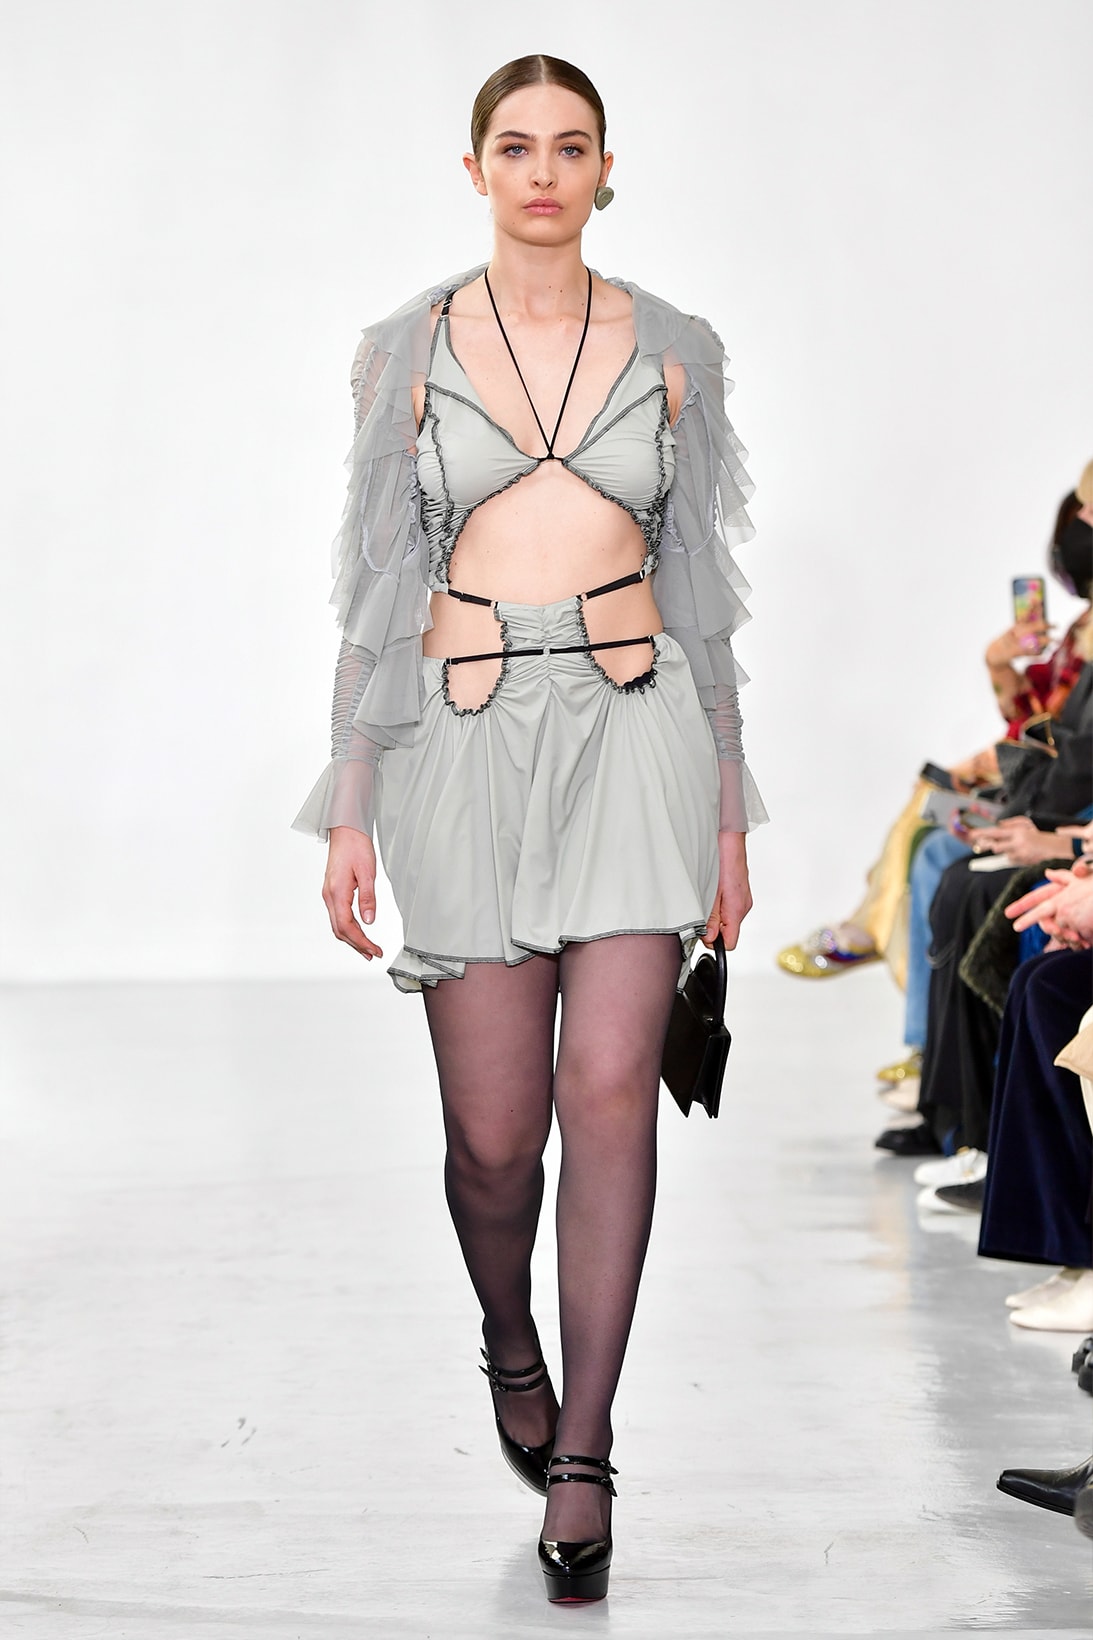 Ester Manas Fall Winter Collection Size Inclusivity Cut-Outs Fashion Week Runway Show Photos Gray Ruffled Dress